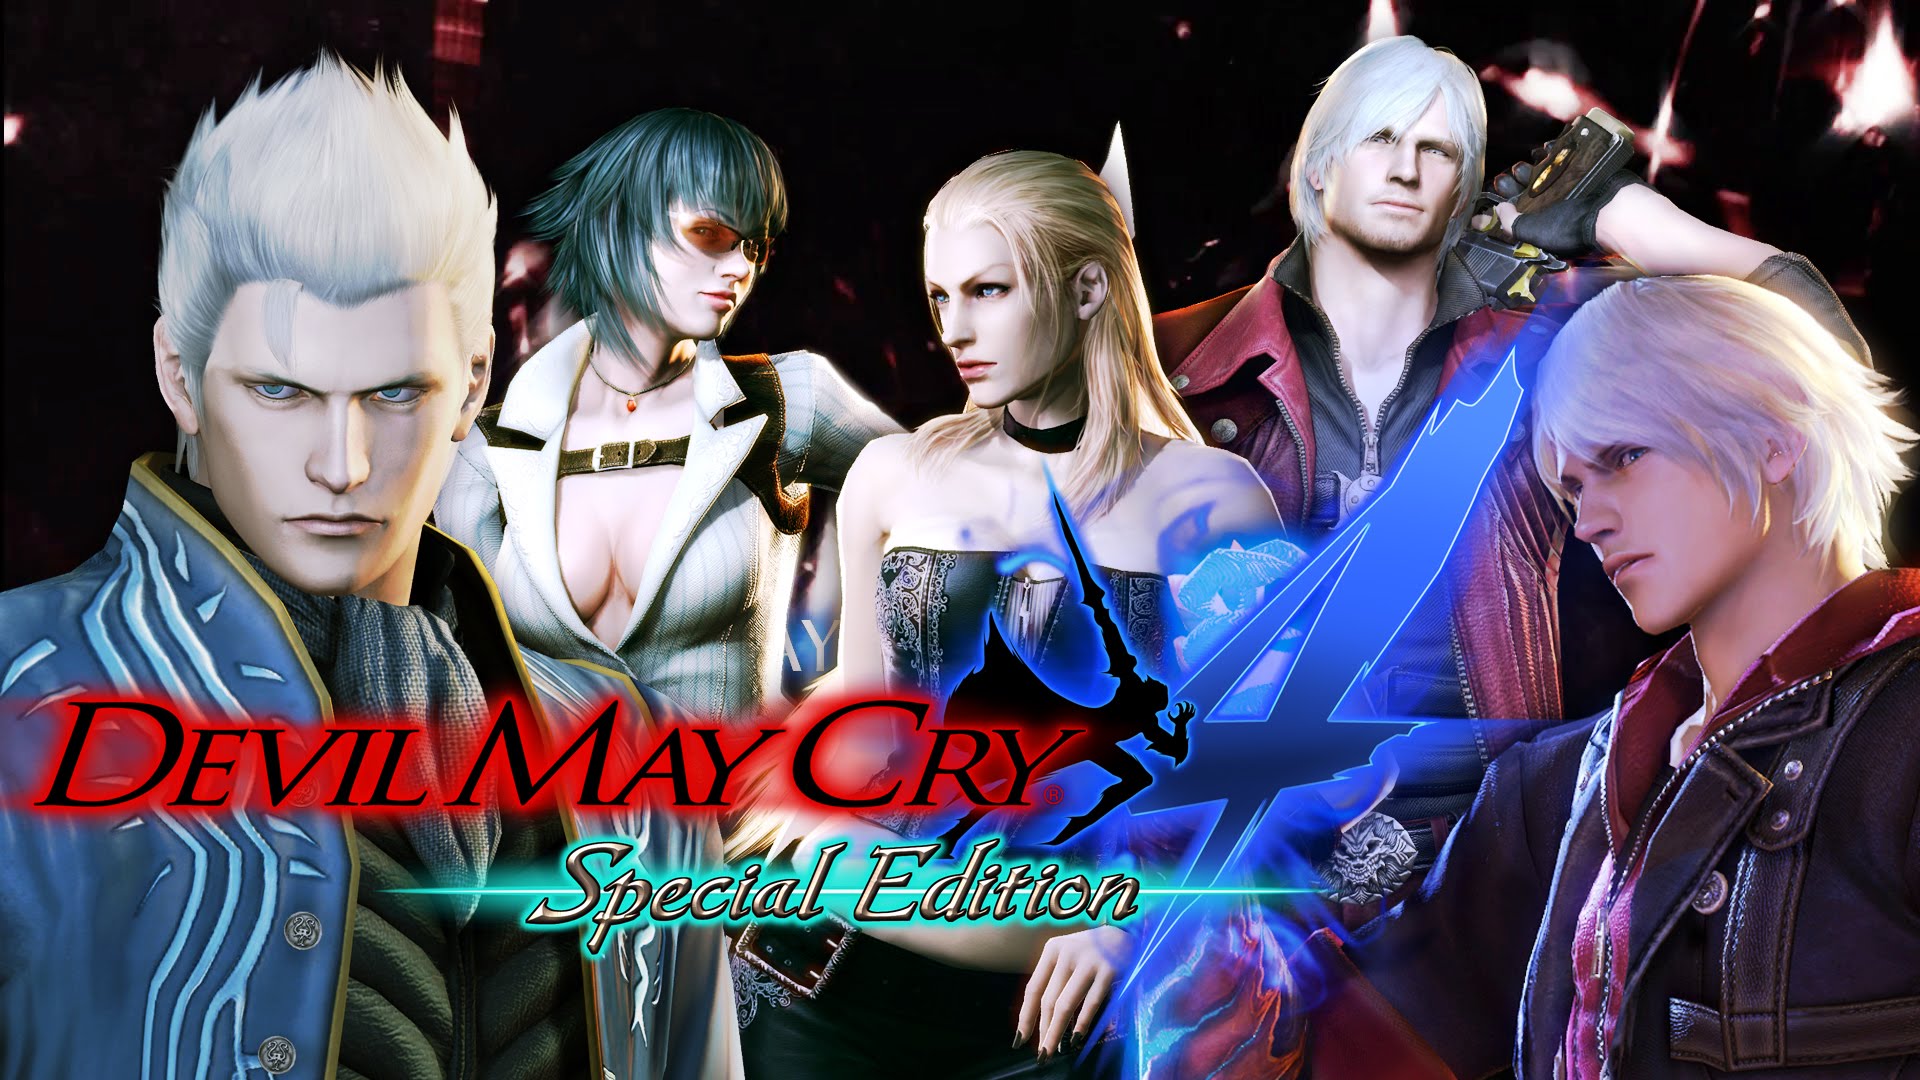 Devil may cry 4 highly compressed kgb